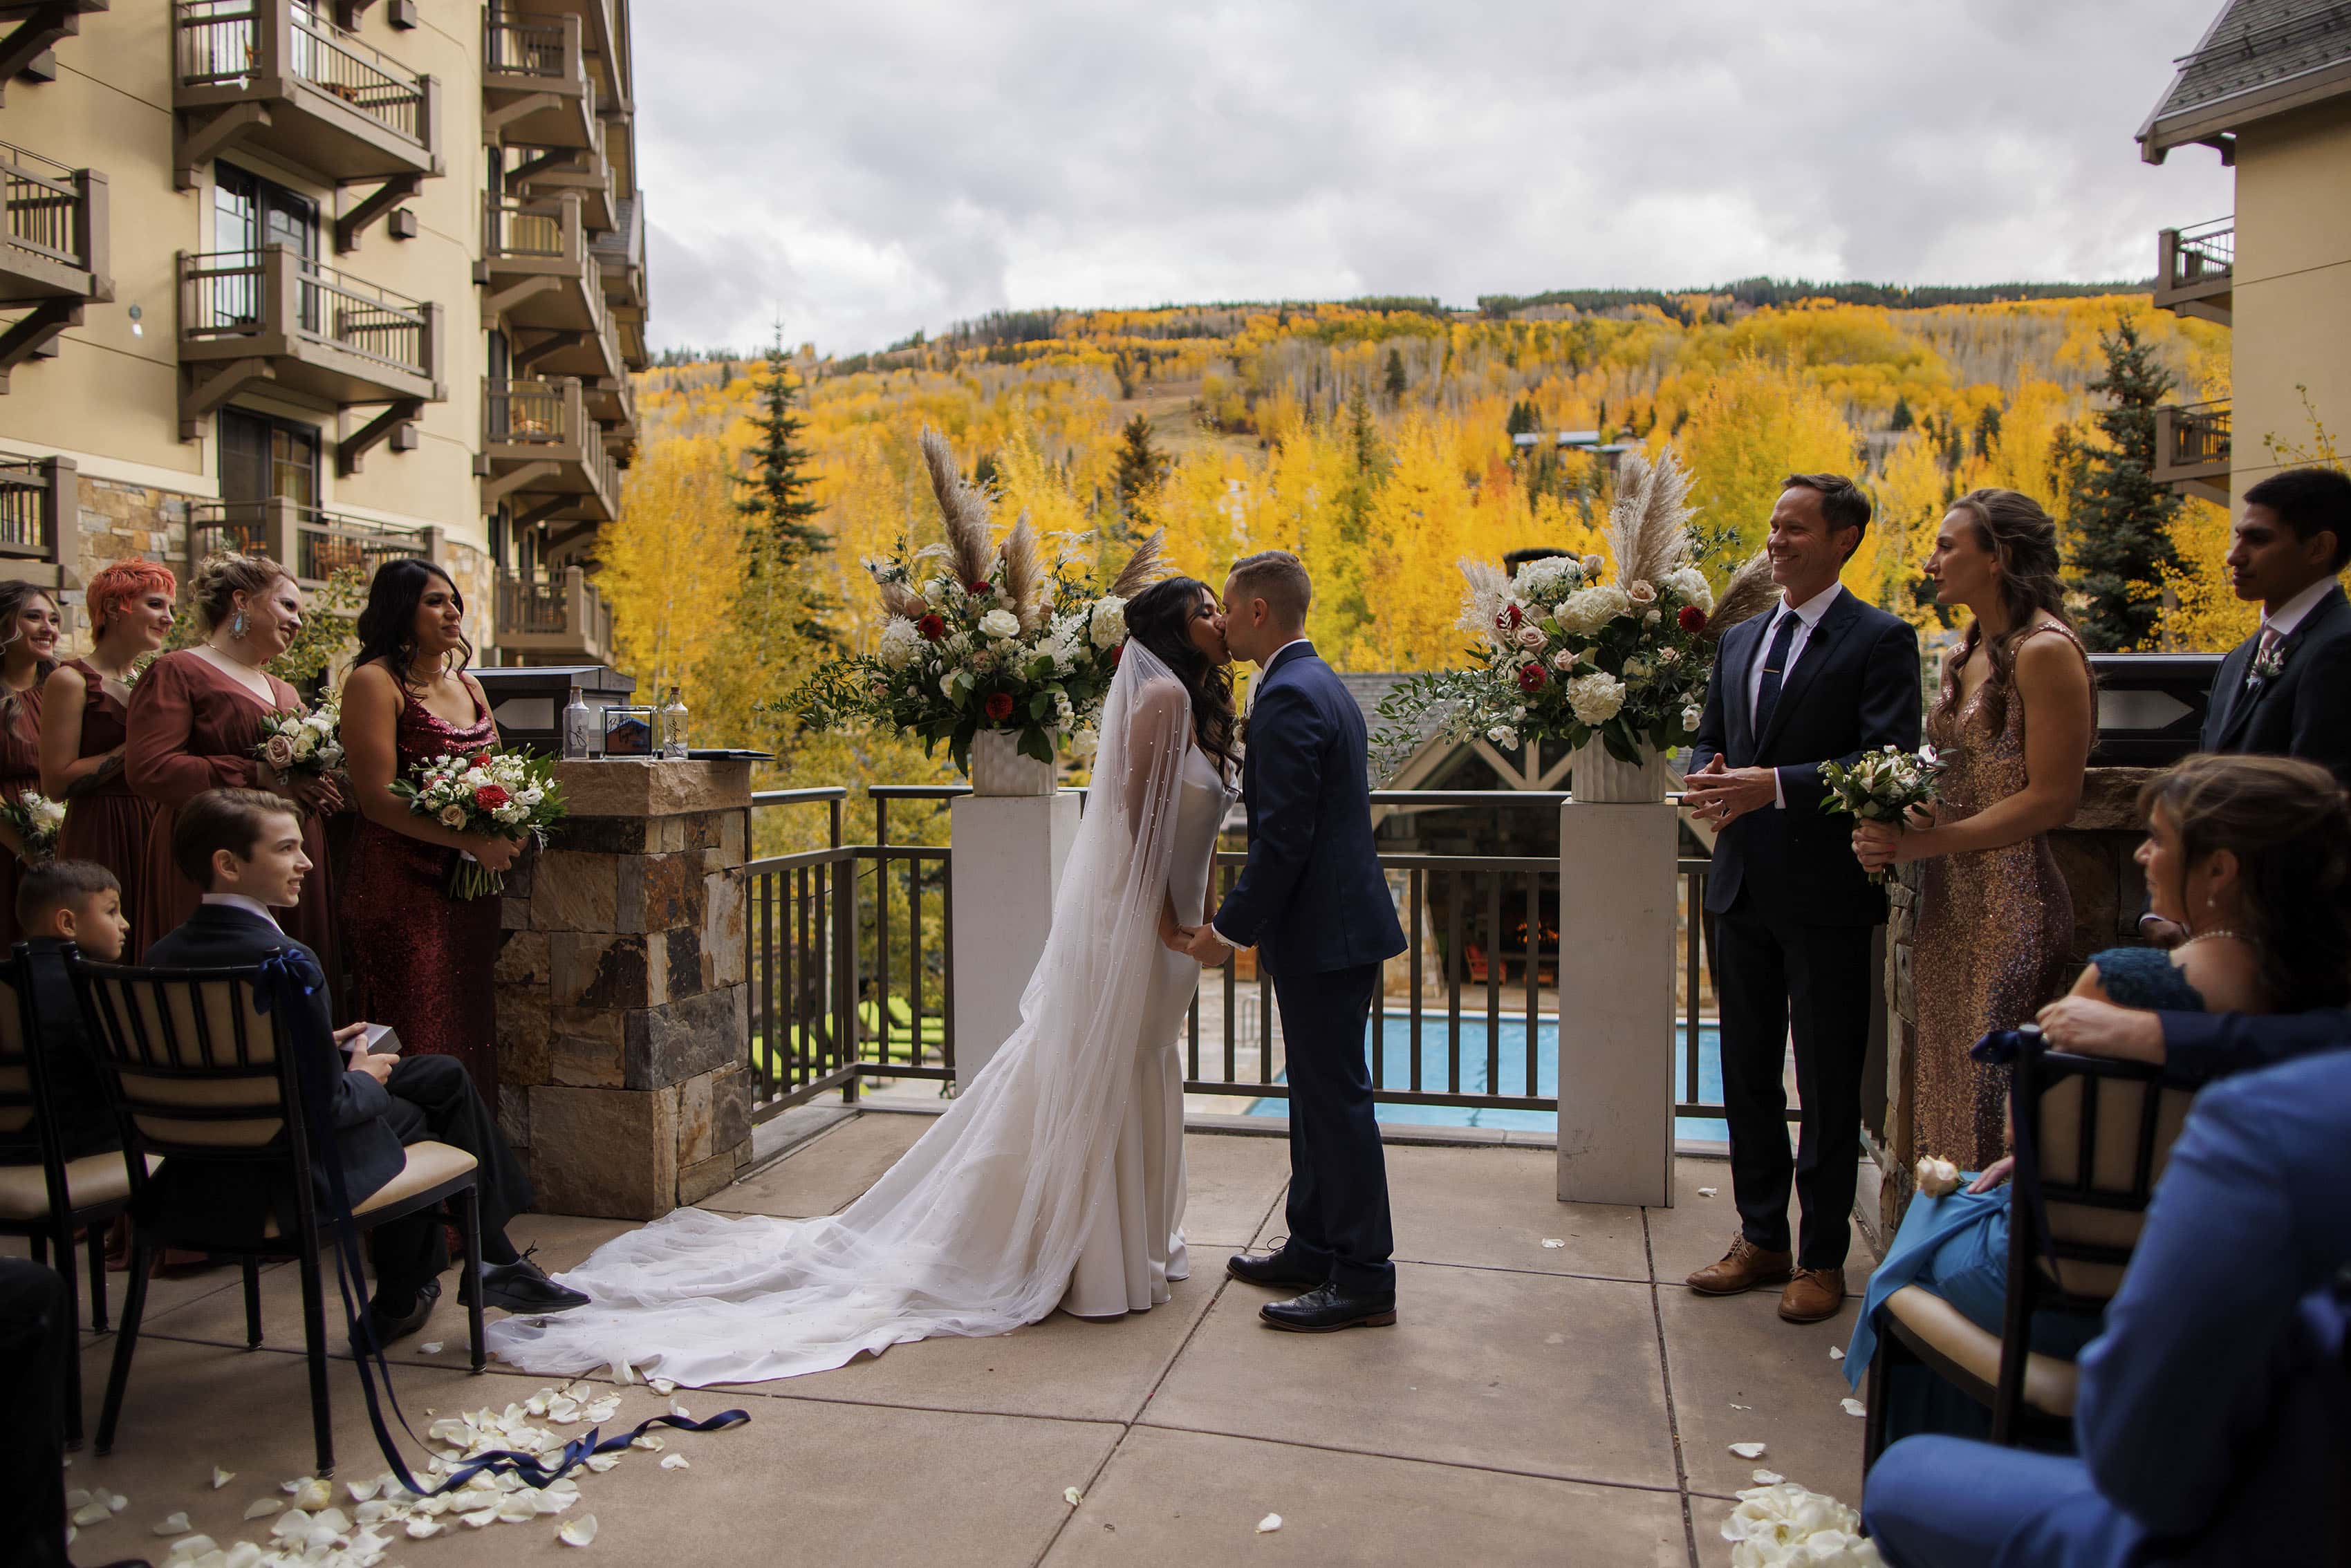 The newlyweds share their first kiss